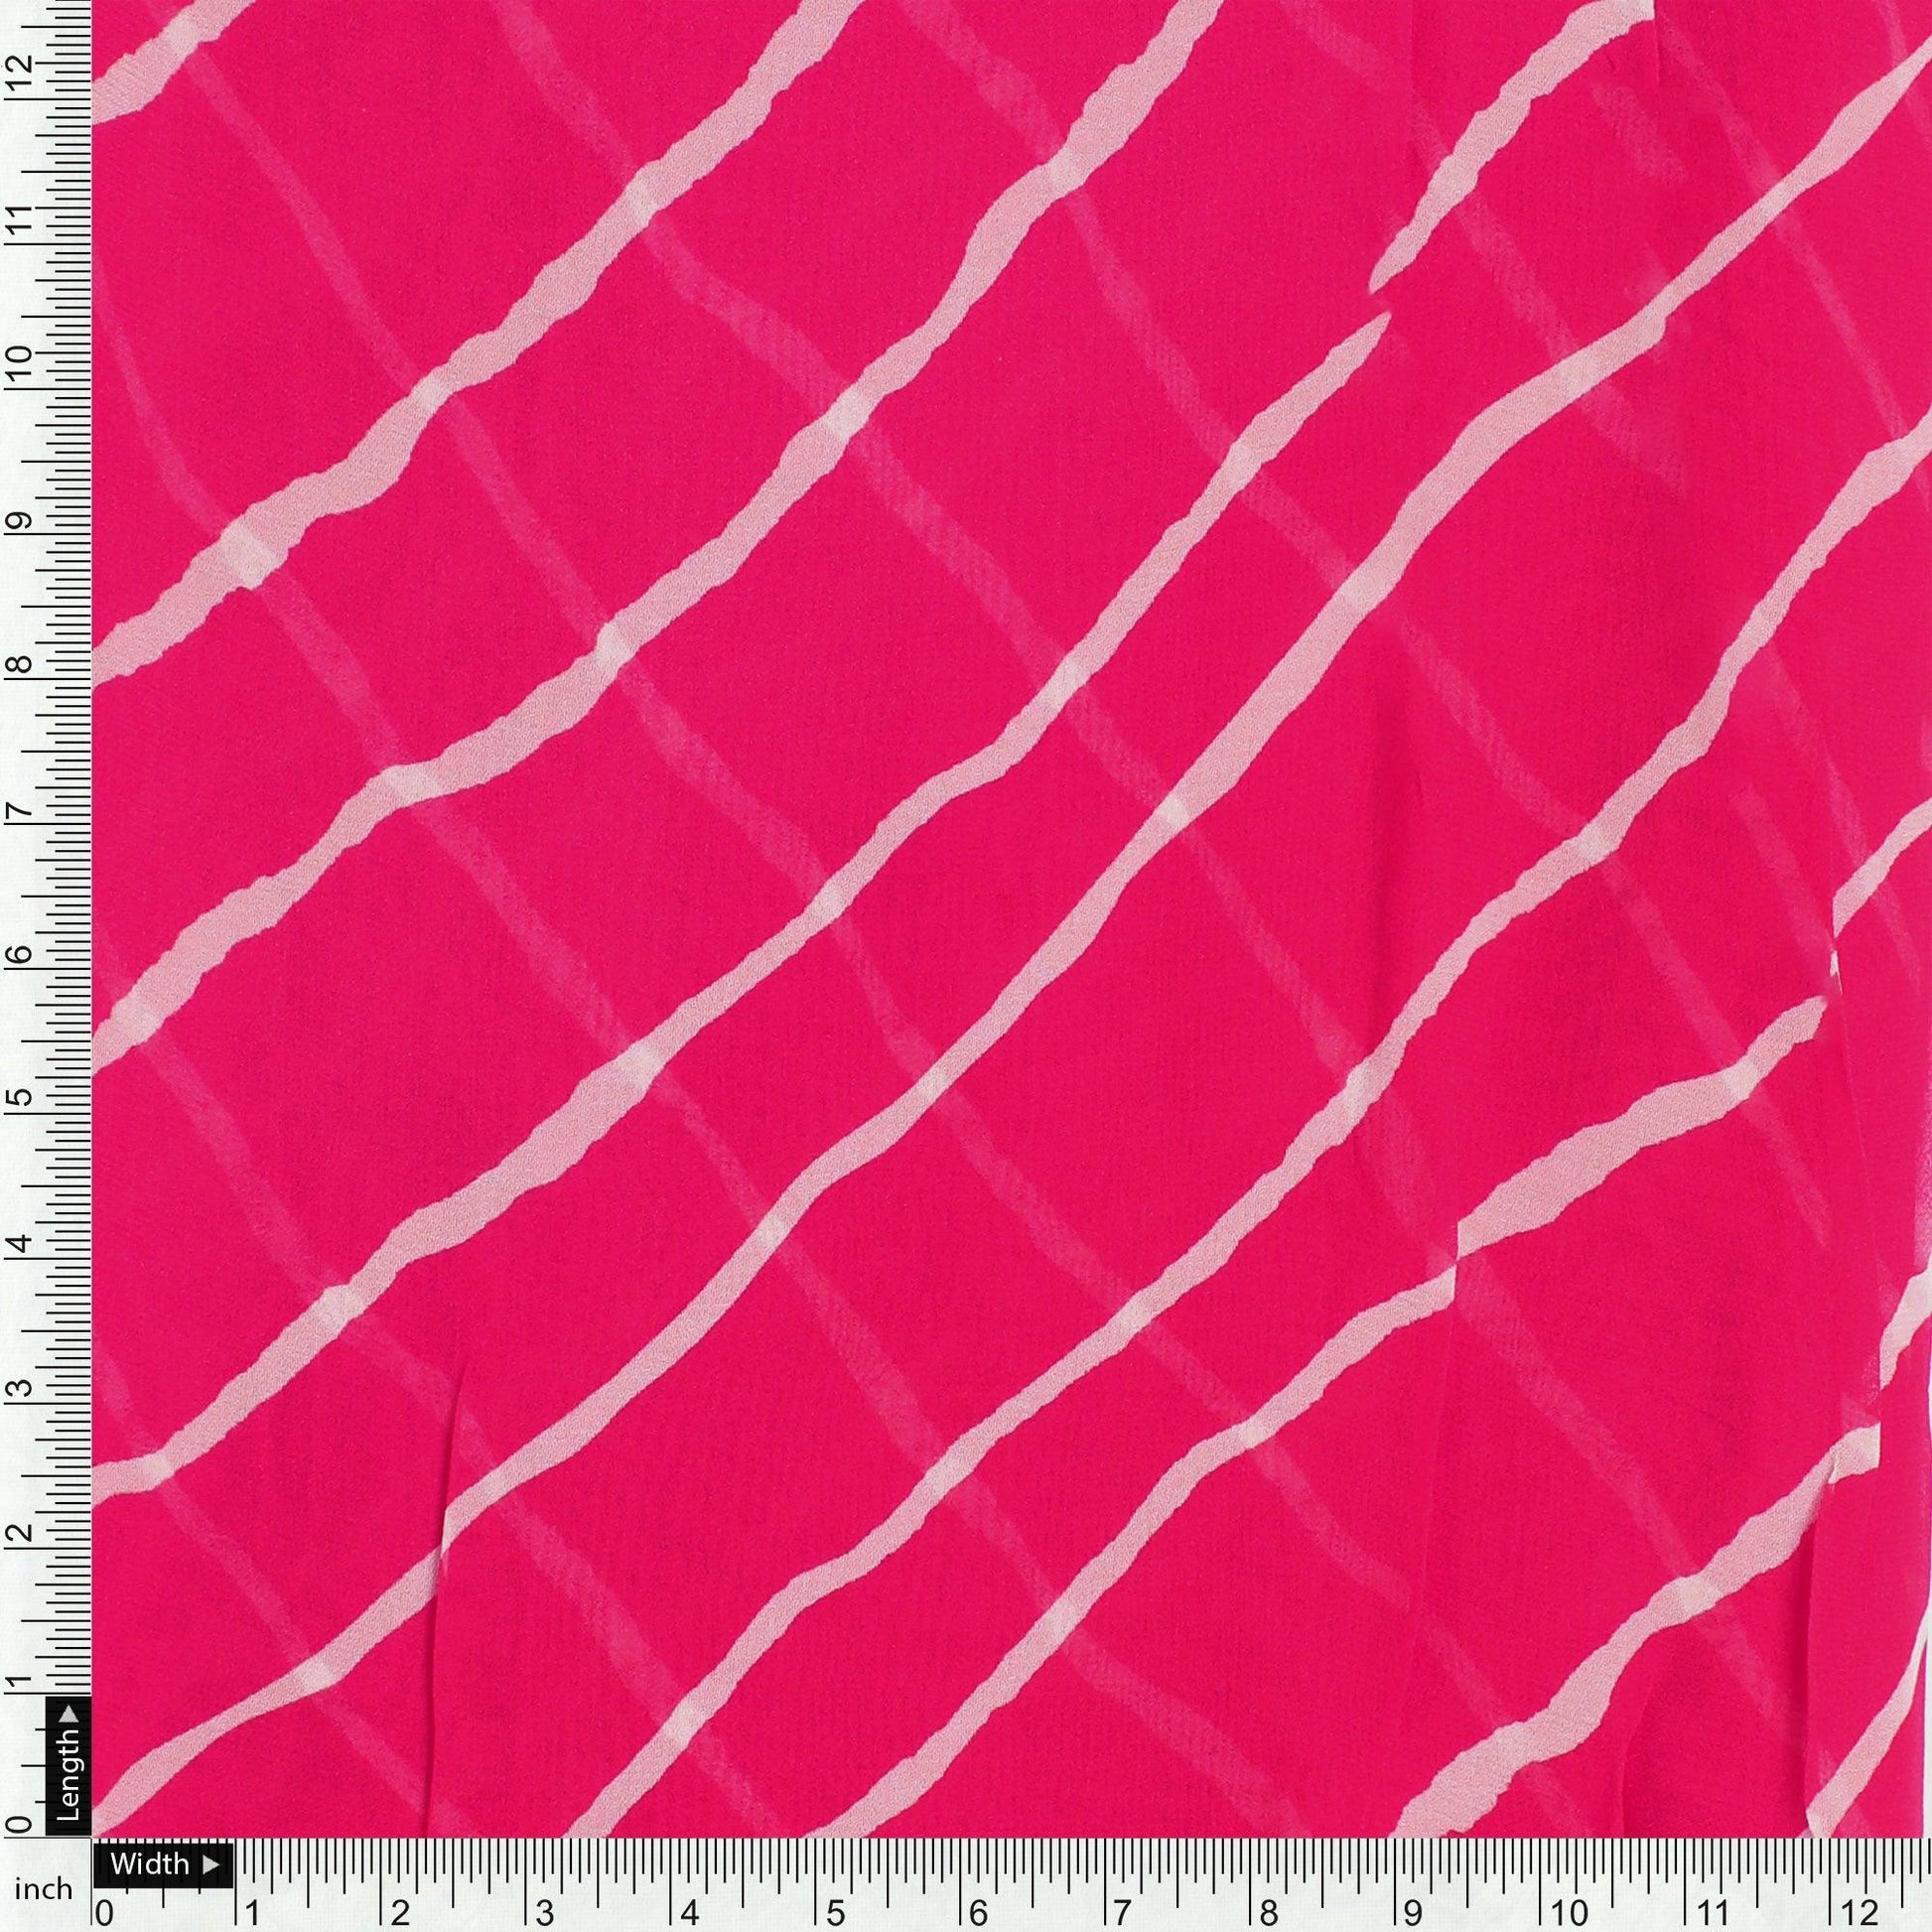 Lovely Pink Gradient Strips Wave Digital Printed Fabric - Pure Georgette - FAB VOGUE Studio®